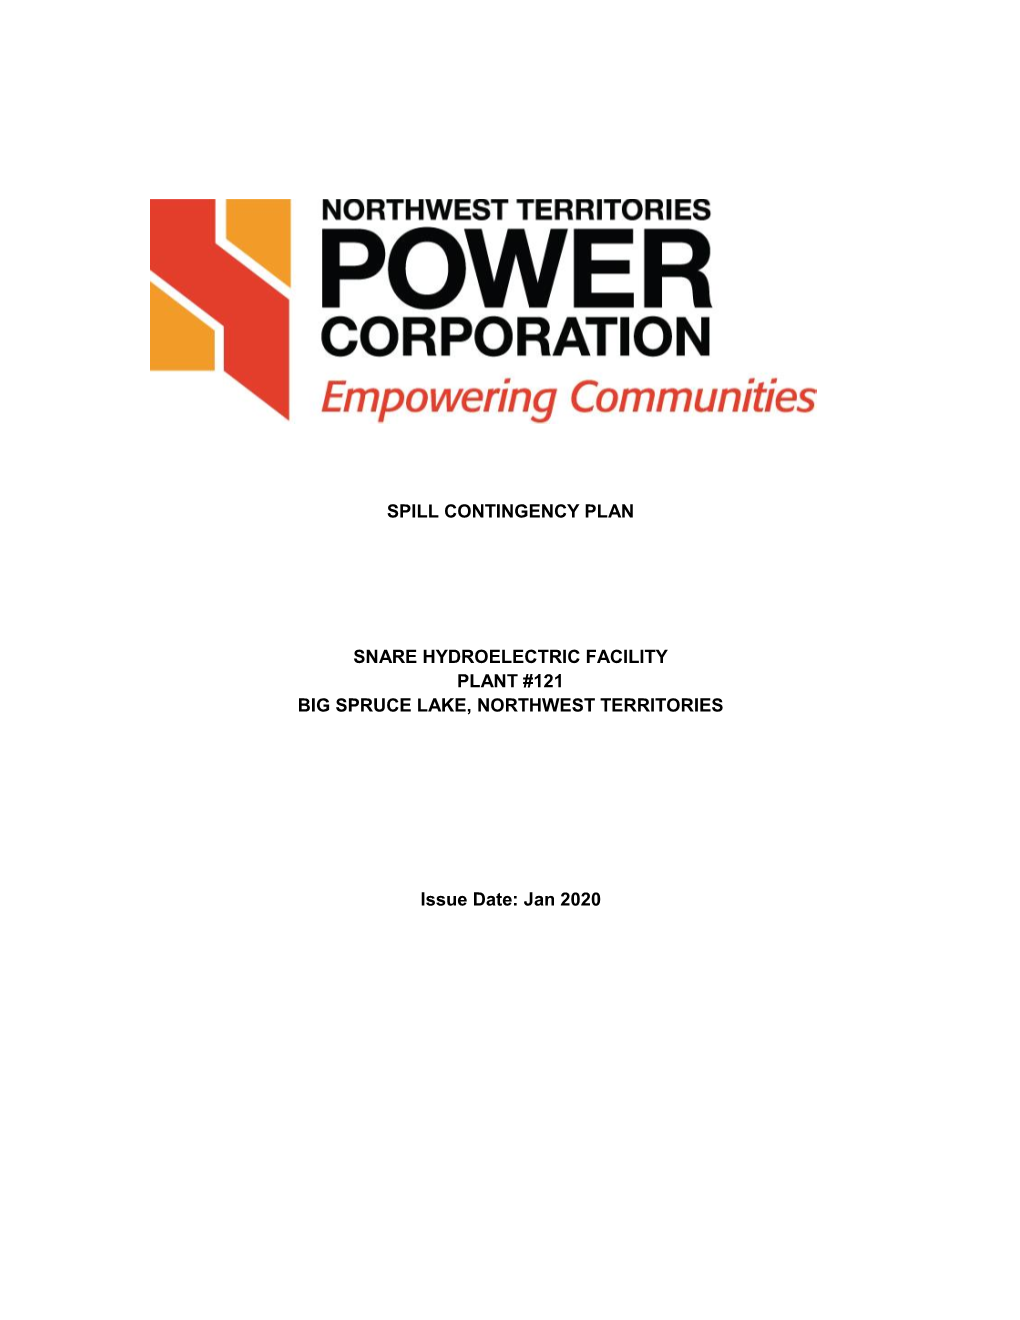 NTPC Policies, and Facility Characteristics; And/Or Ii